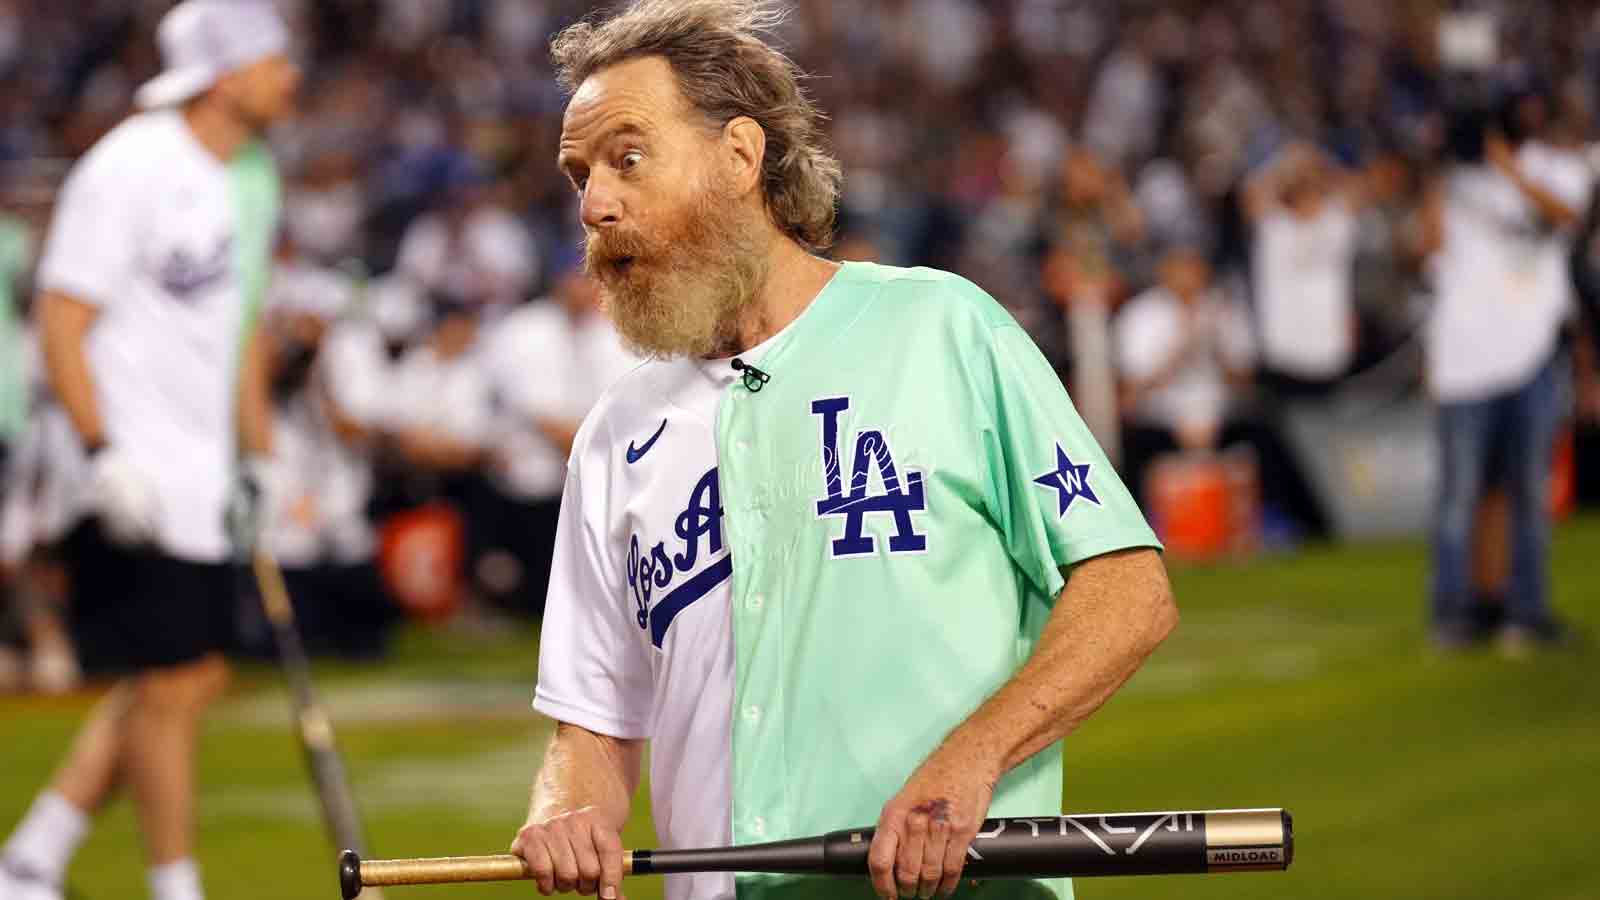 Ouch! Actor Cranston hit by liner at All-Star celeb softball